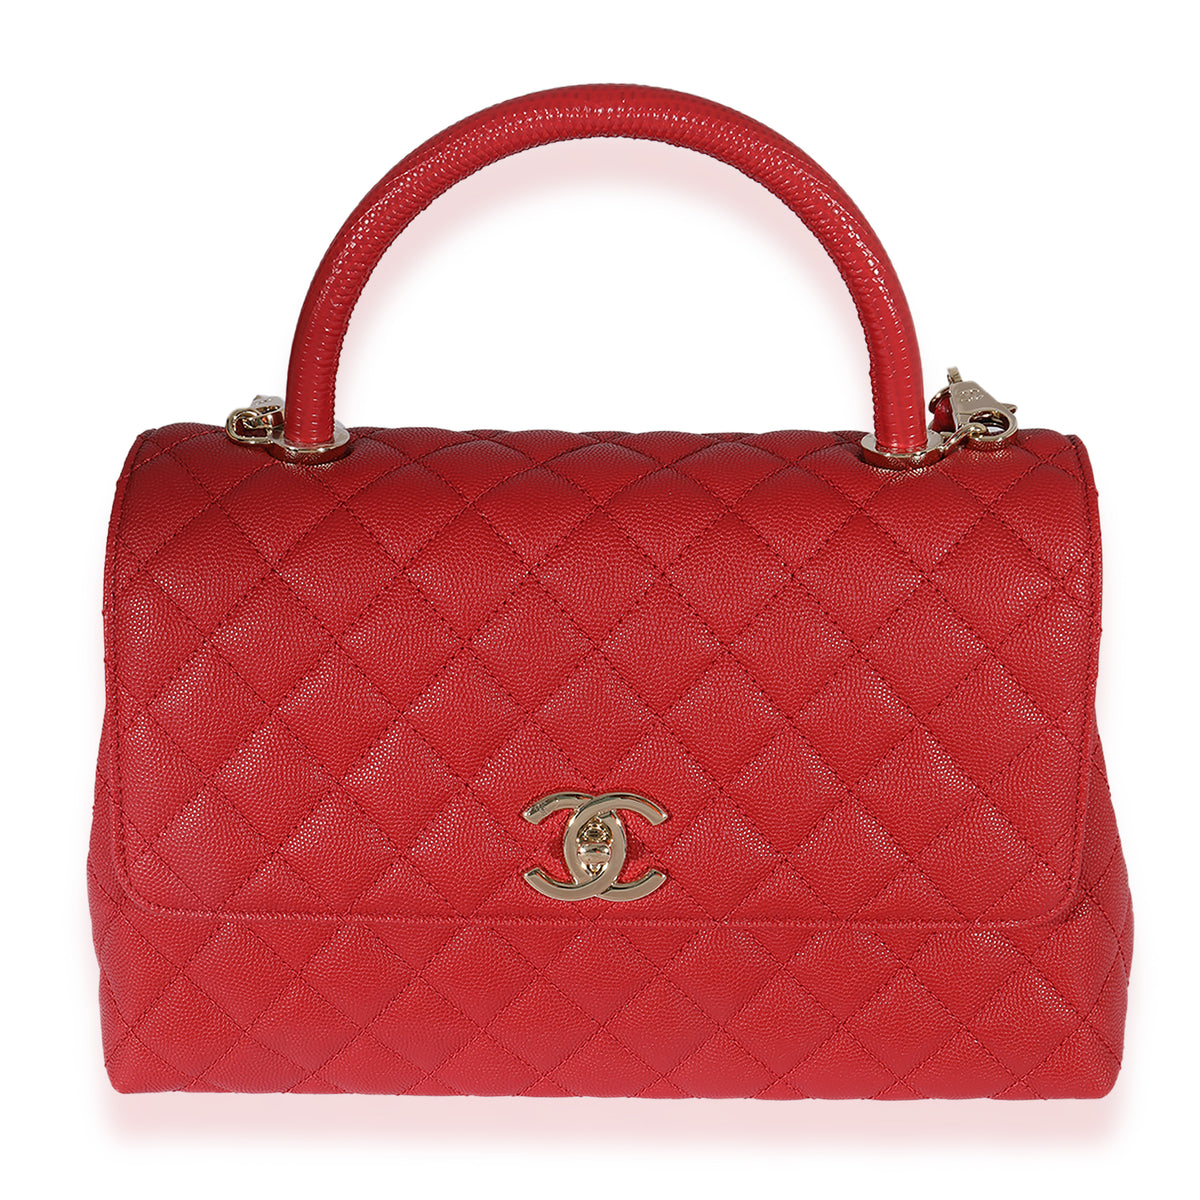 Chanel Red Quilted Caviar Medium Coco Handle Flap Bag, myGemma